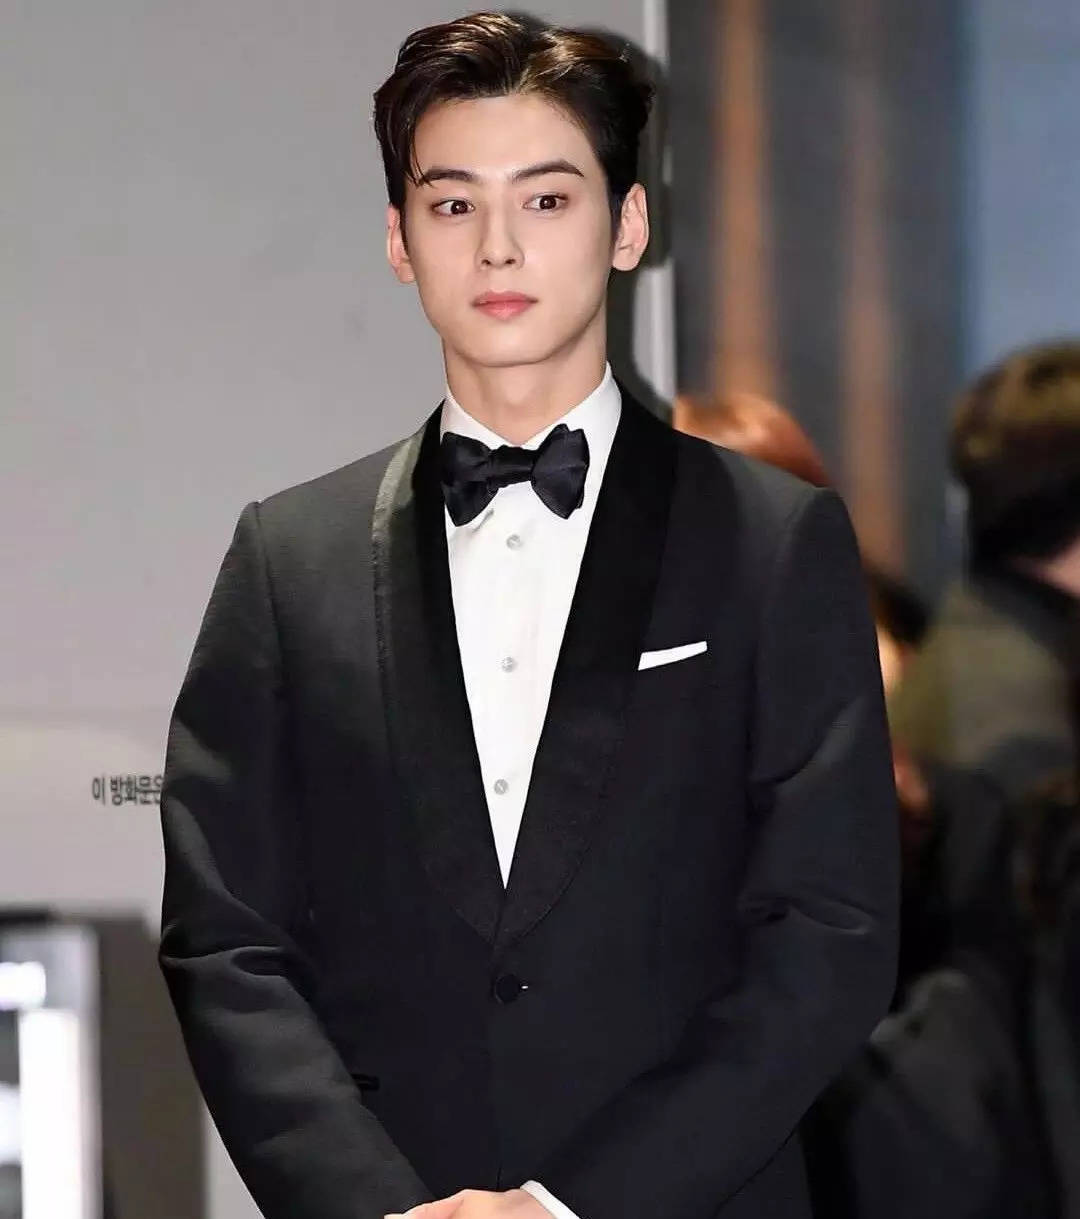 Cha Eun Woo in Suits- A handsome thread